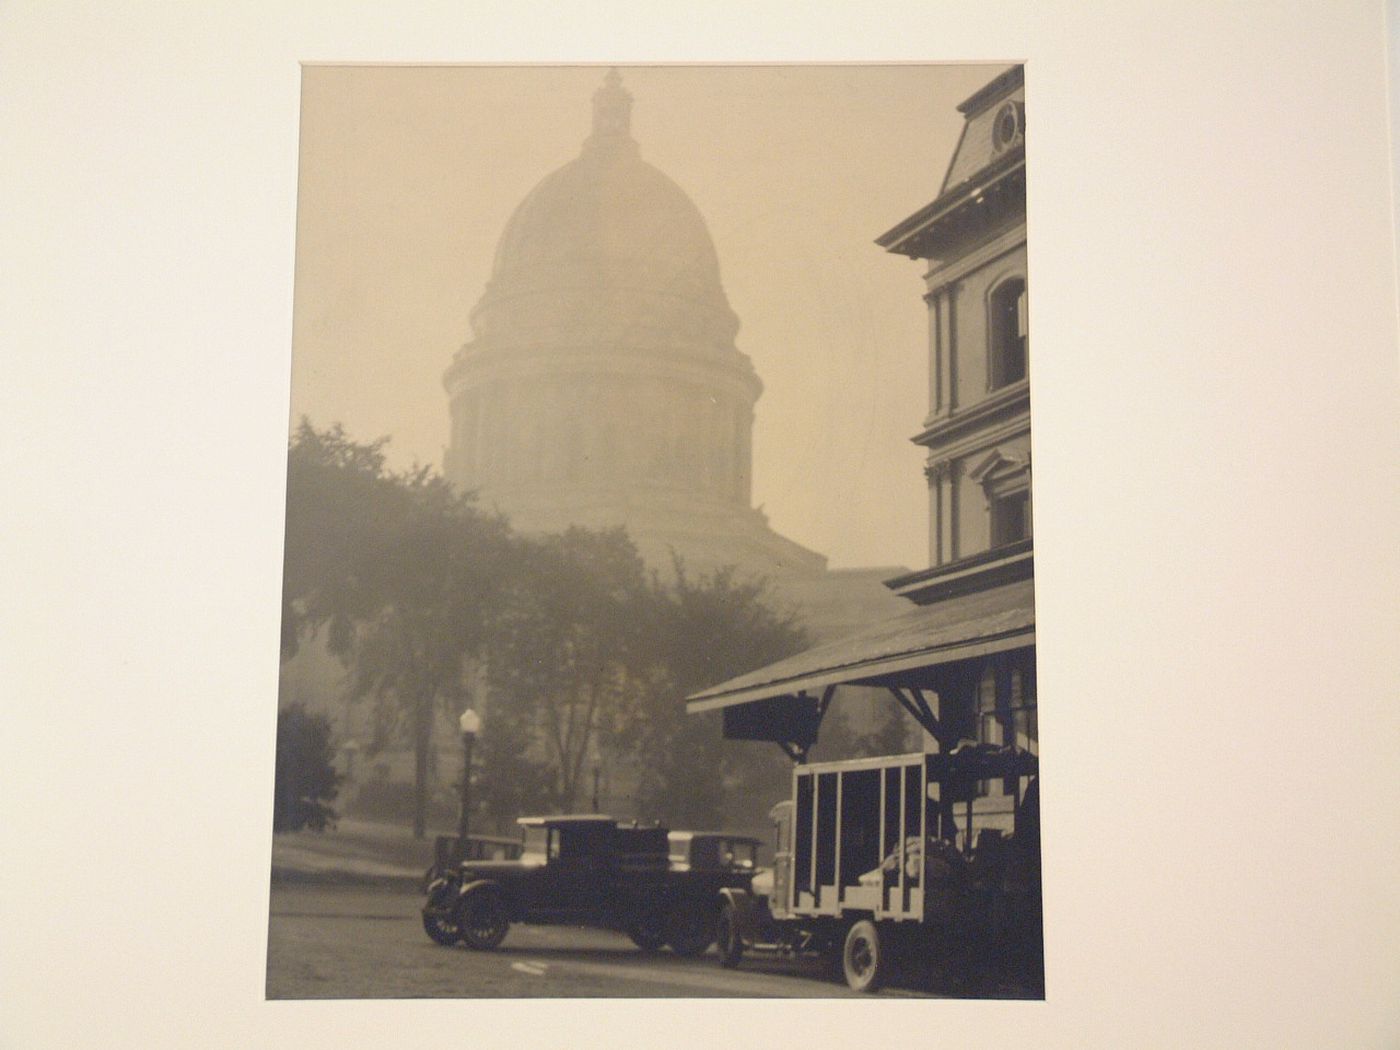 Capitol dome in distance, cars and house, right foreground, Madison, Wisconsin